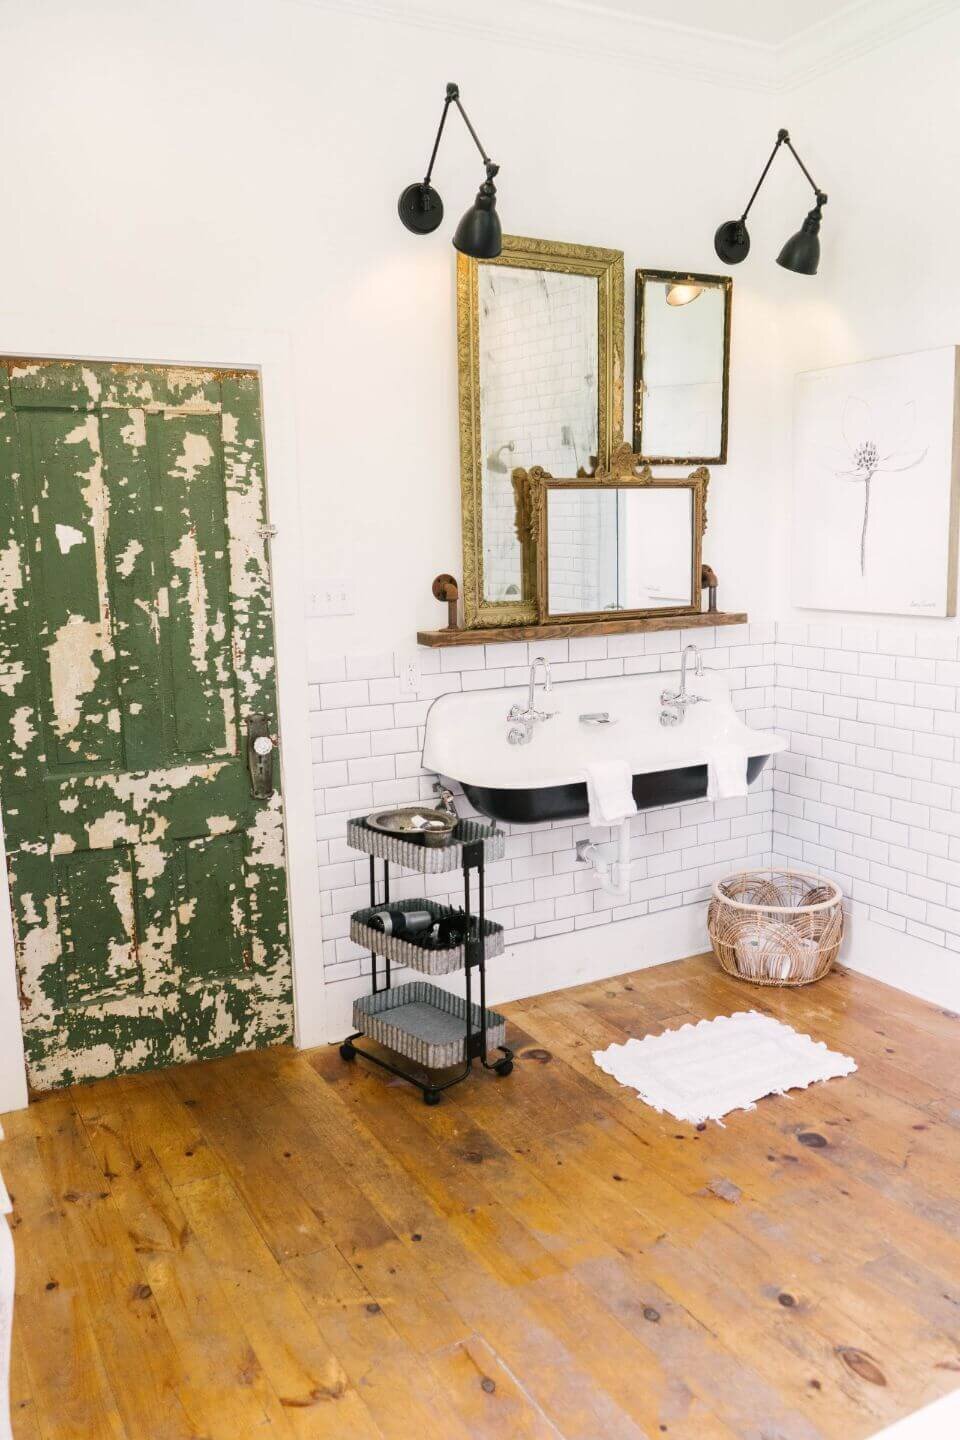 The Morrow House Home Tour - Historic Waco AirBnb - Cottage Home external - As Seen in Fixer Upper Season 5 - Vintage Mirrors Layered in Bathroom Vintage Sink -农舍生万博赞助意大利甲级联赛活。jpg